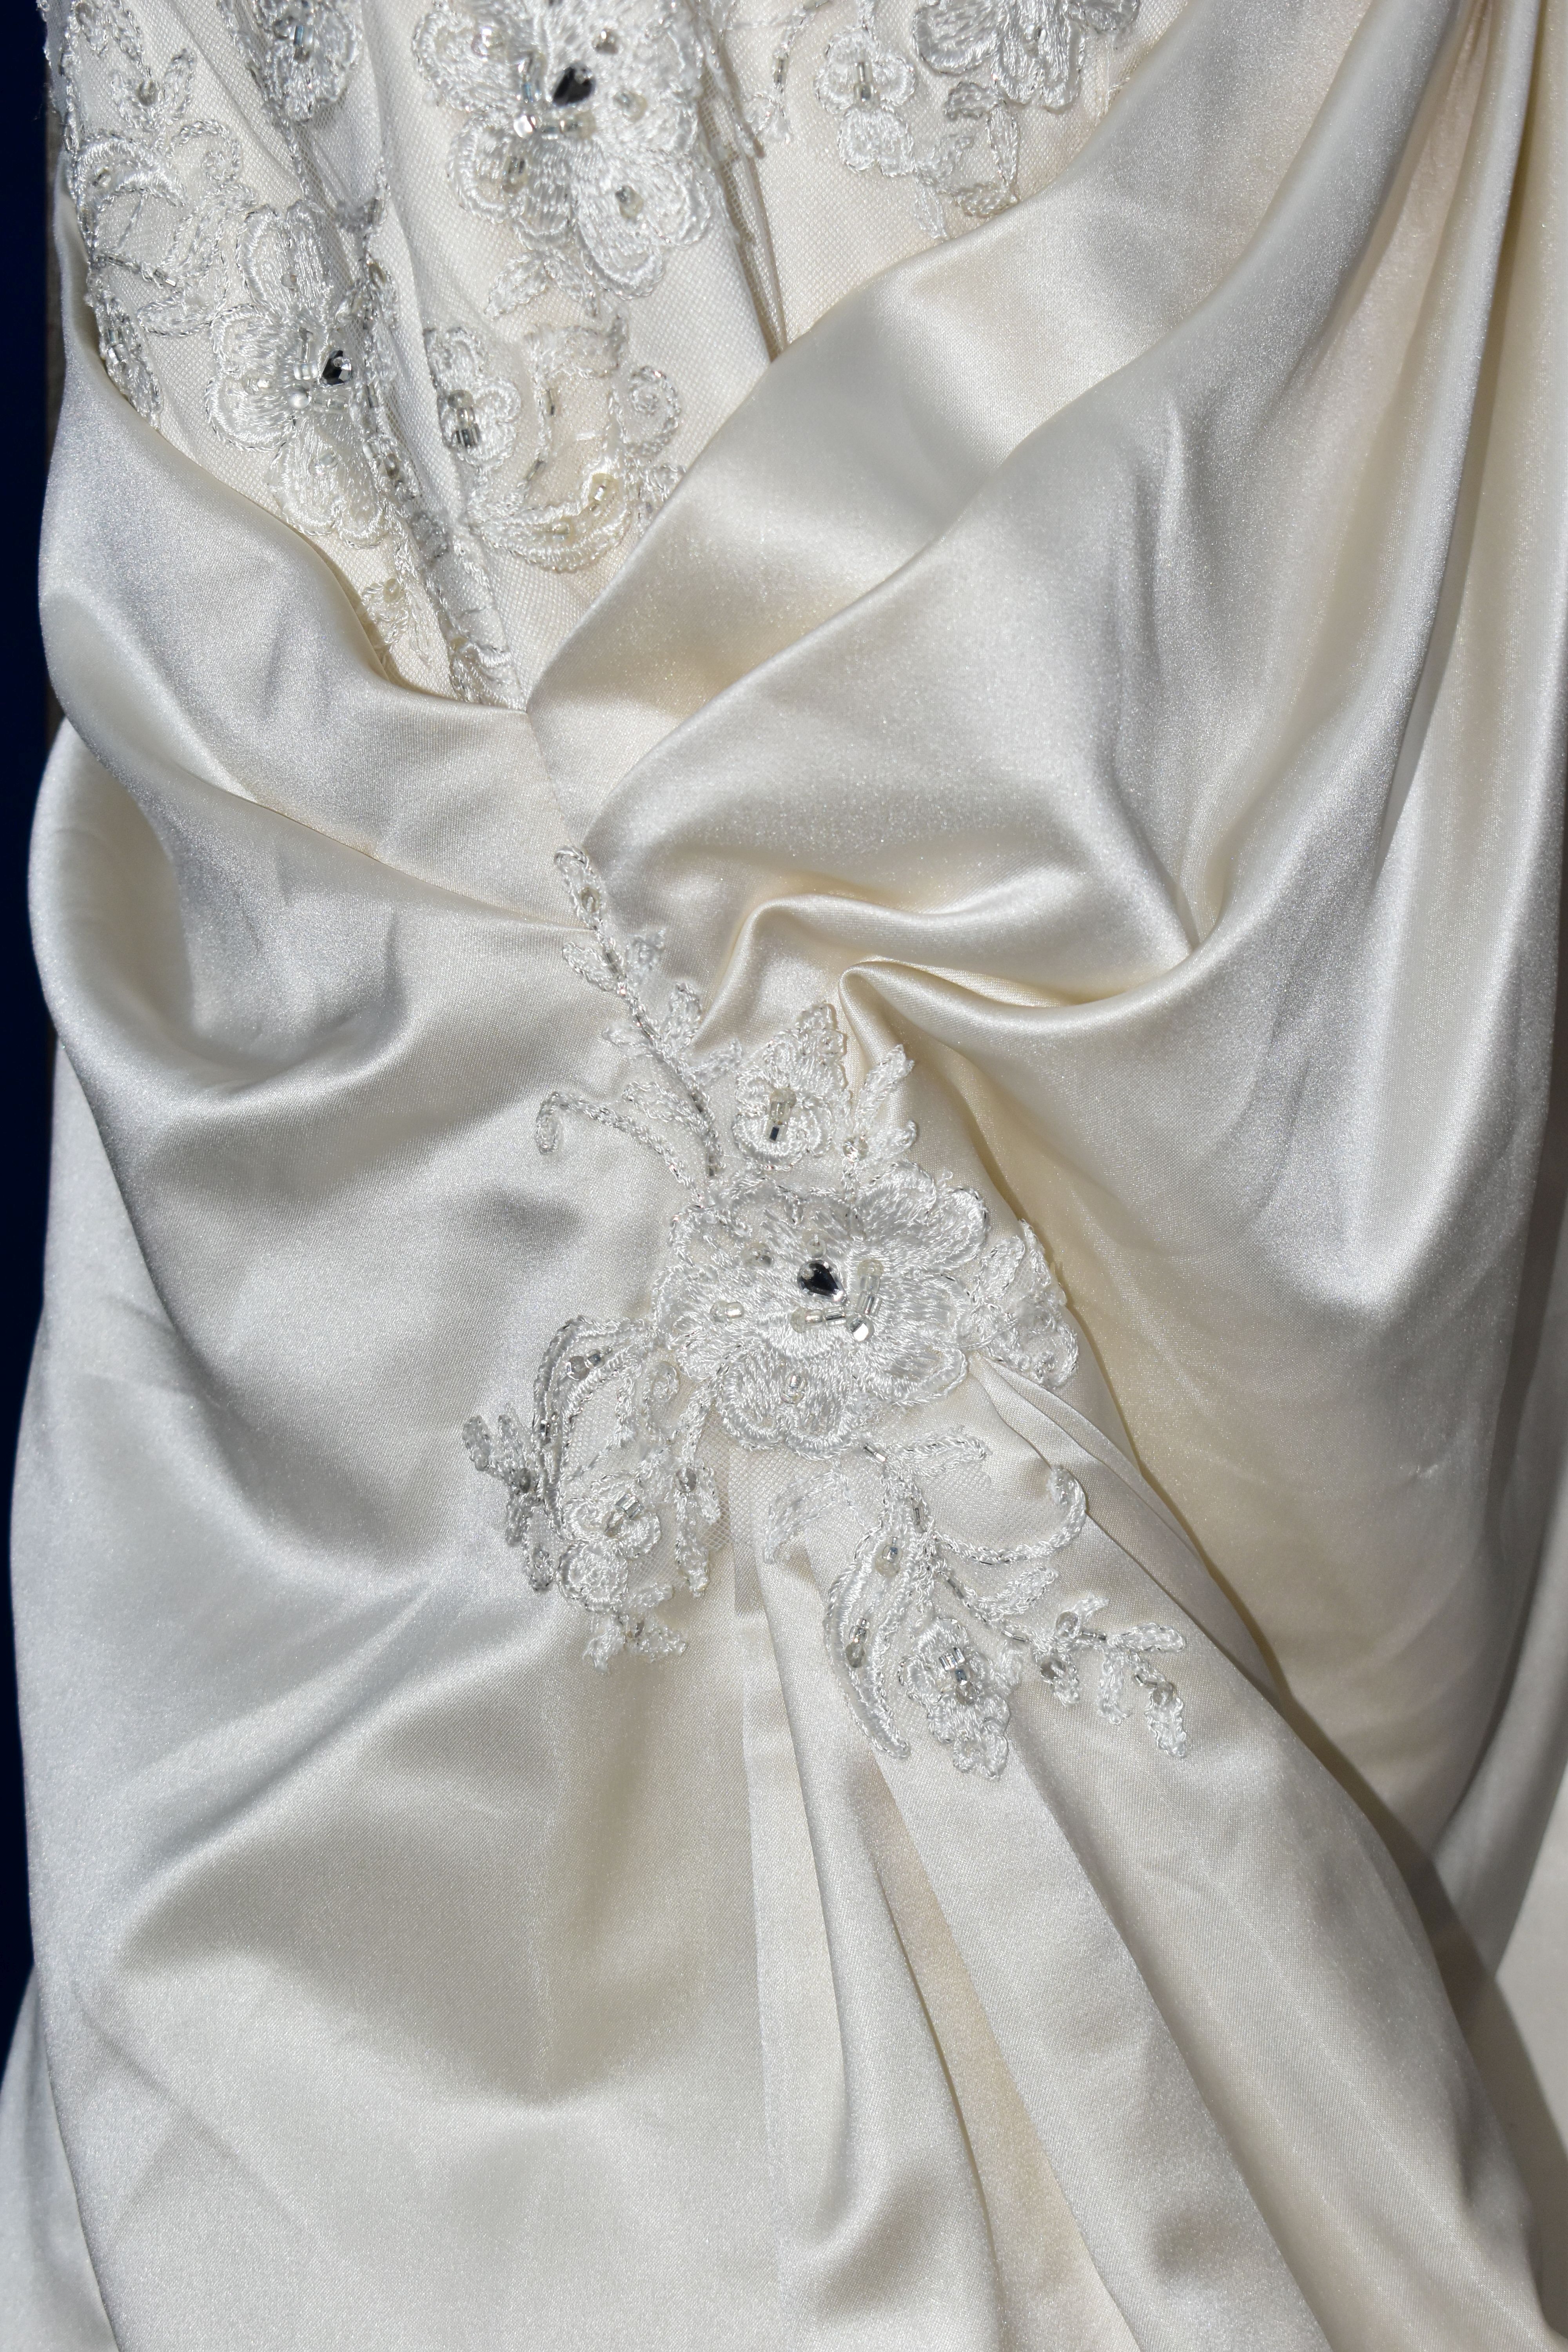 WEDDING GOWN, champagne, size 10/12, satin with beaded appliques, gathered satin skirt (1) - Image 7 of 13